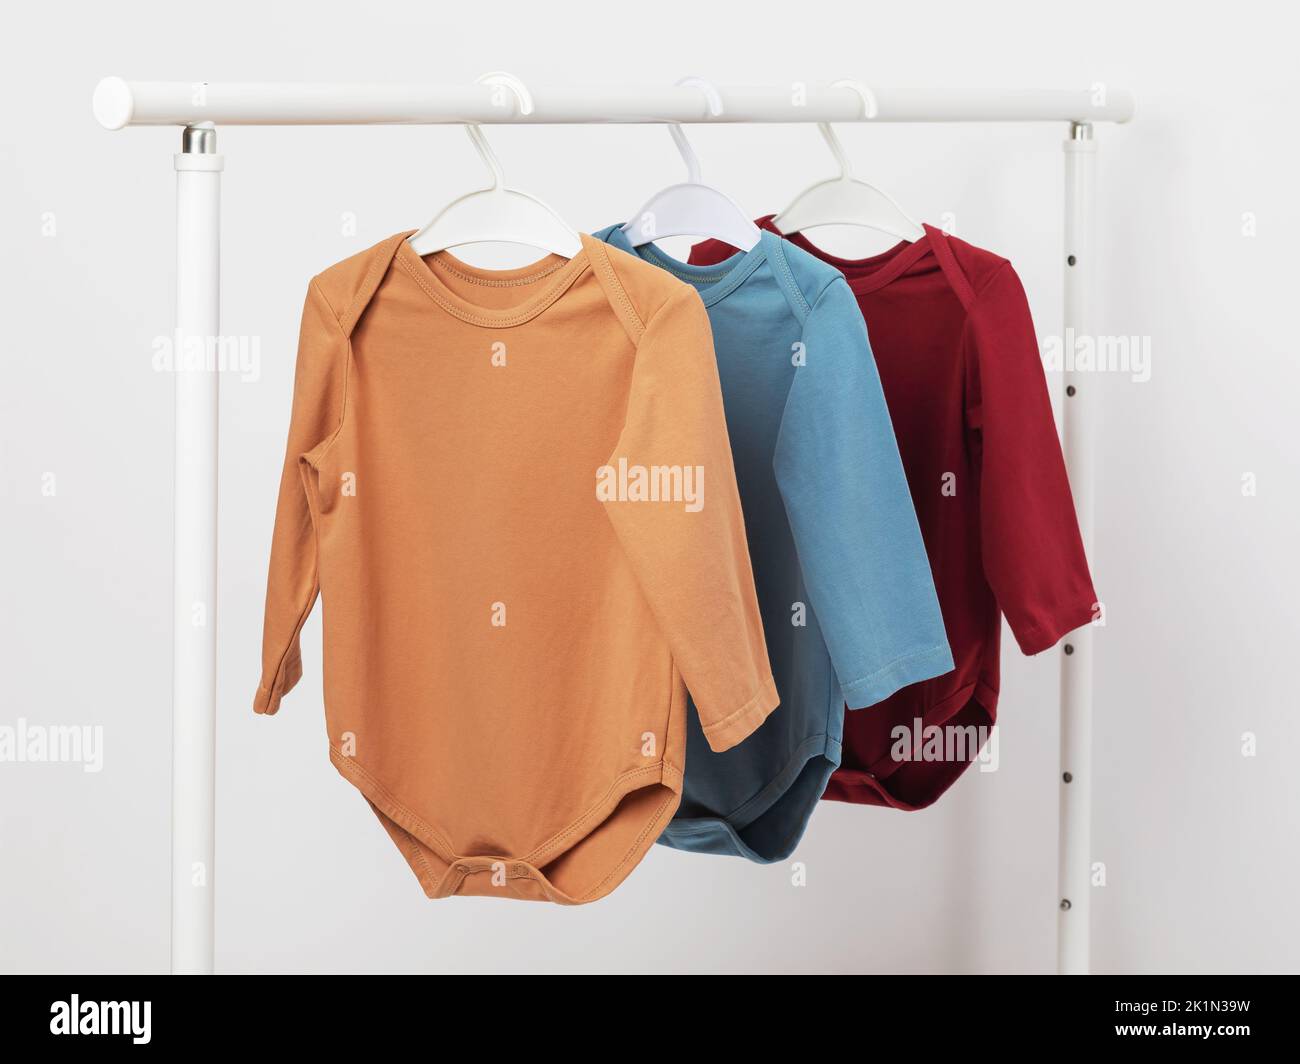 Multicolored long sleeve baby bodysuits hanging on a hanger Stock Photo